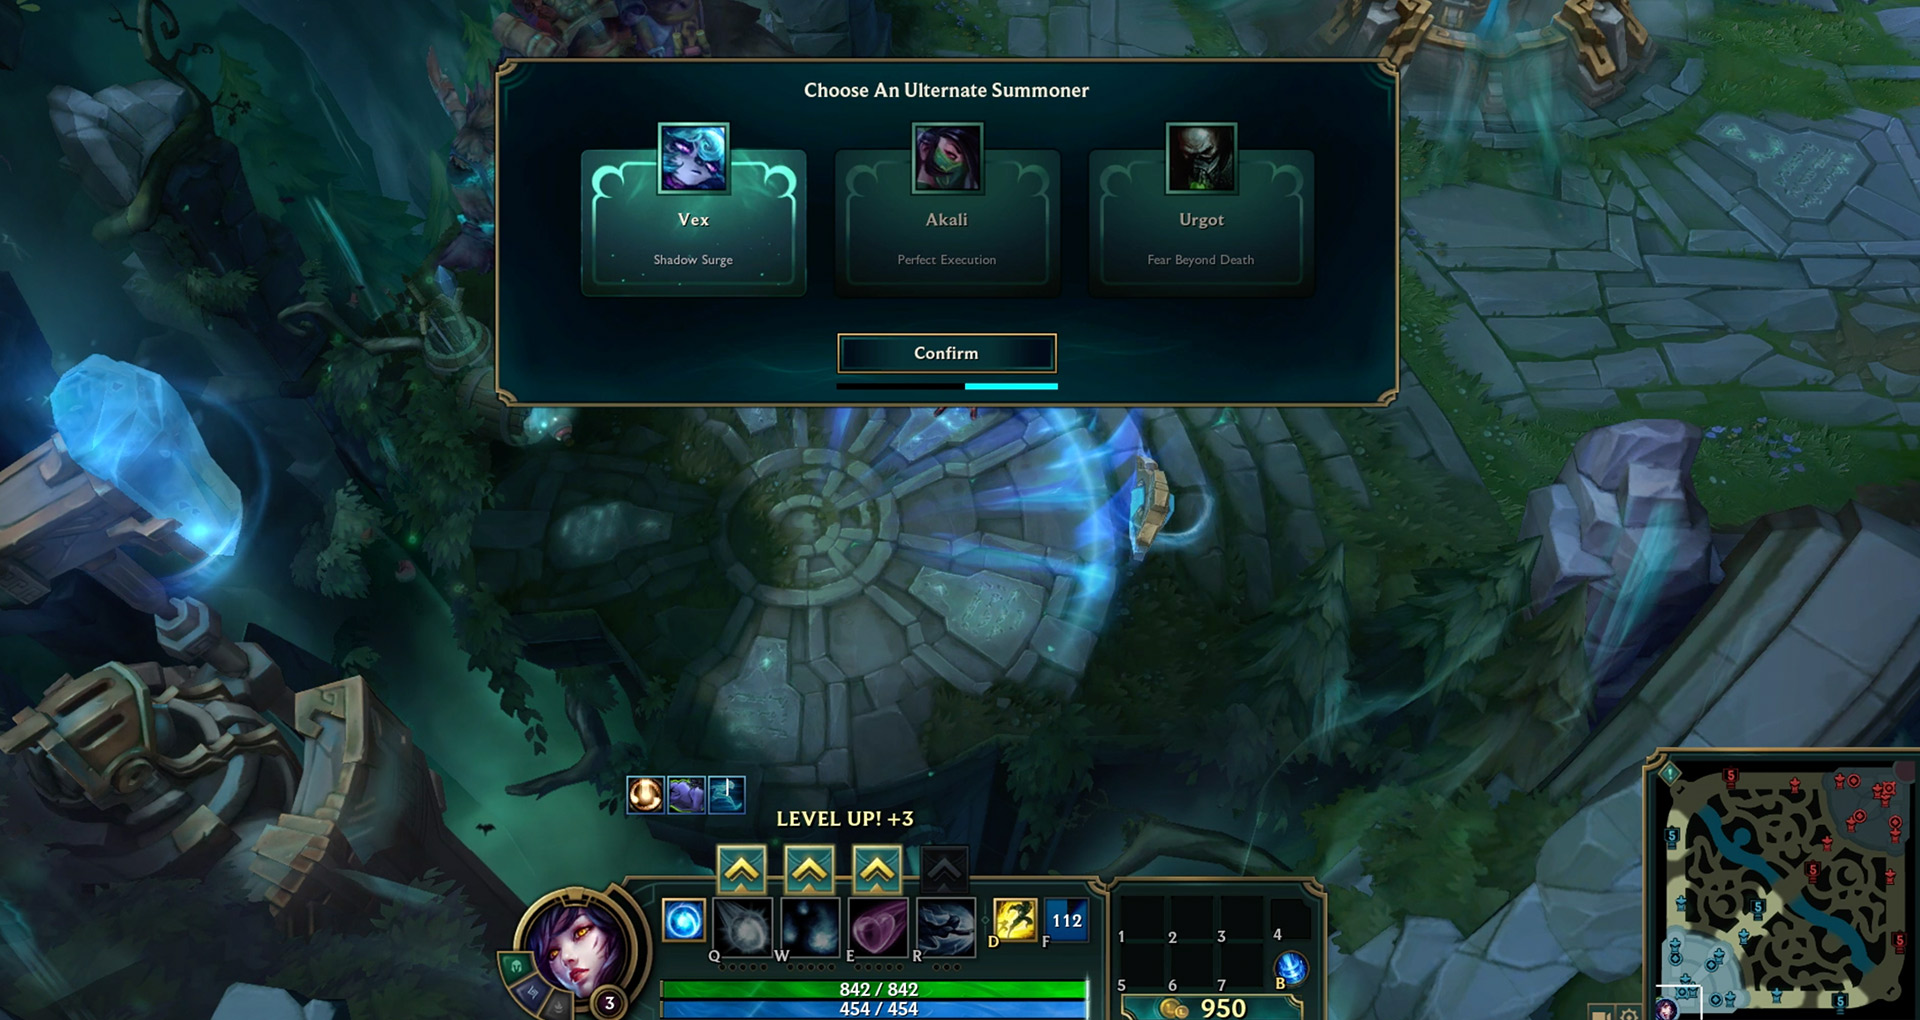 How to chat in league of legends during game